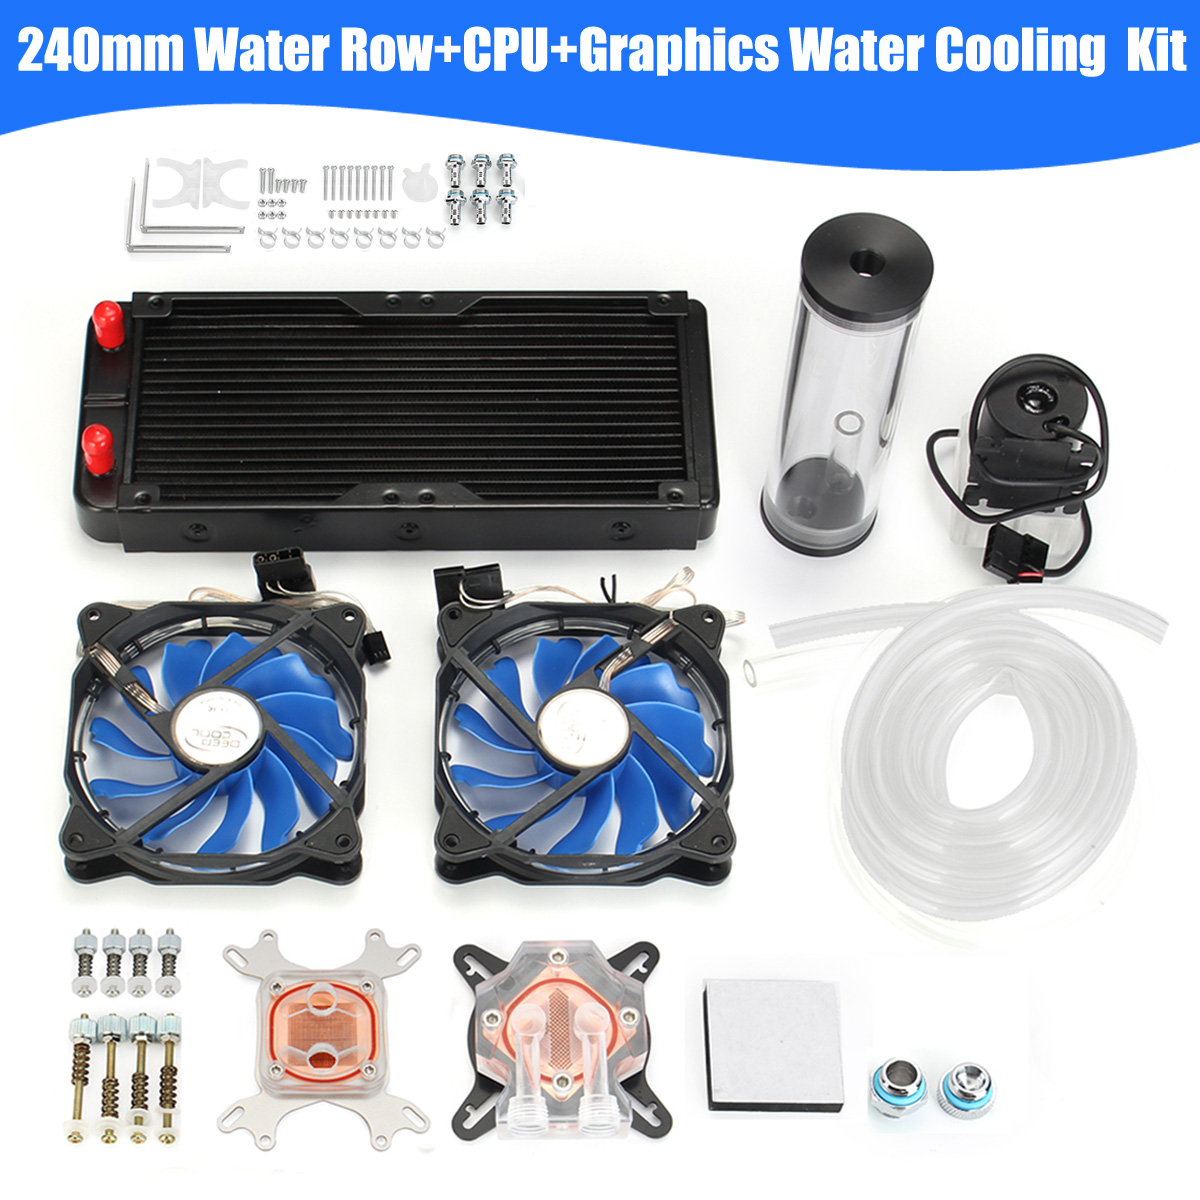 DIY PC Water Cooling Kit With 240mm Water Row + CPU Water Cooling System Kit Computers Radiator Pump Reservoir Heat Sink